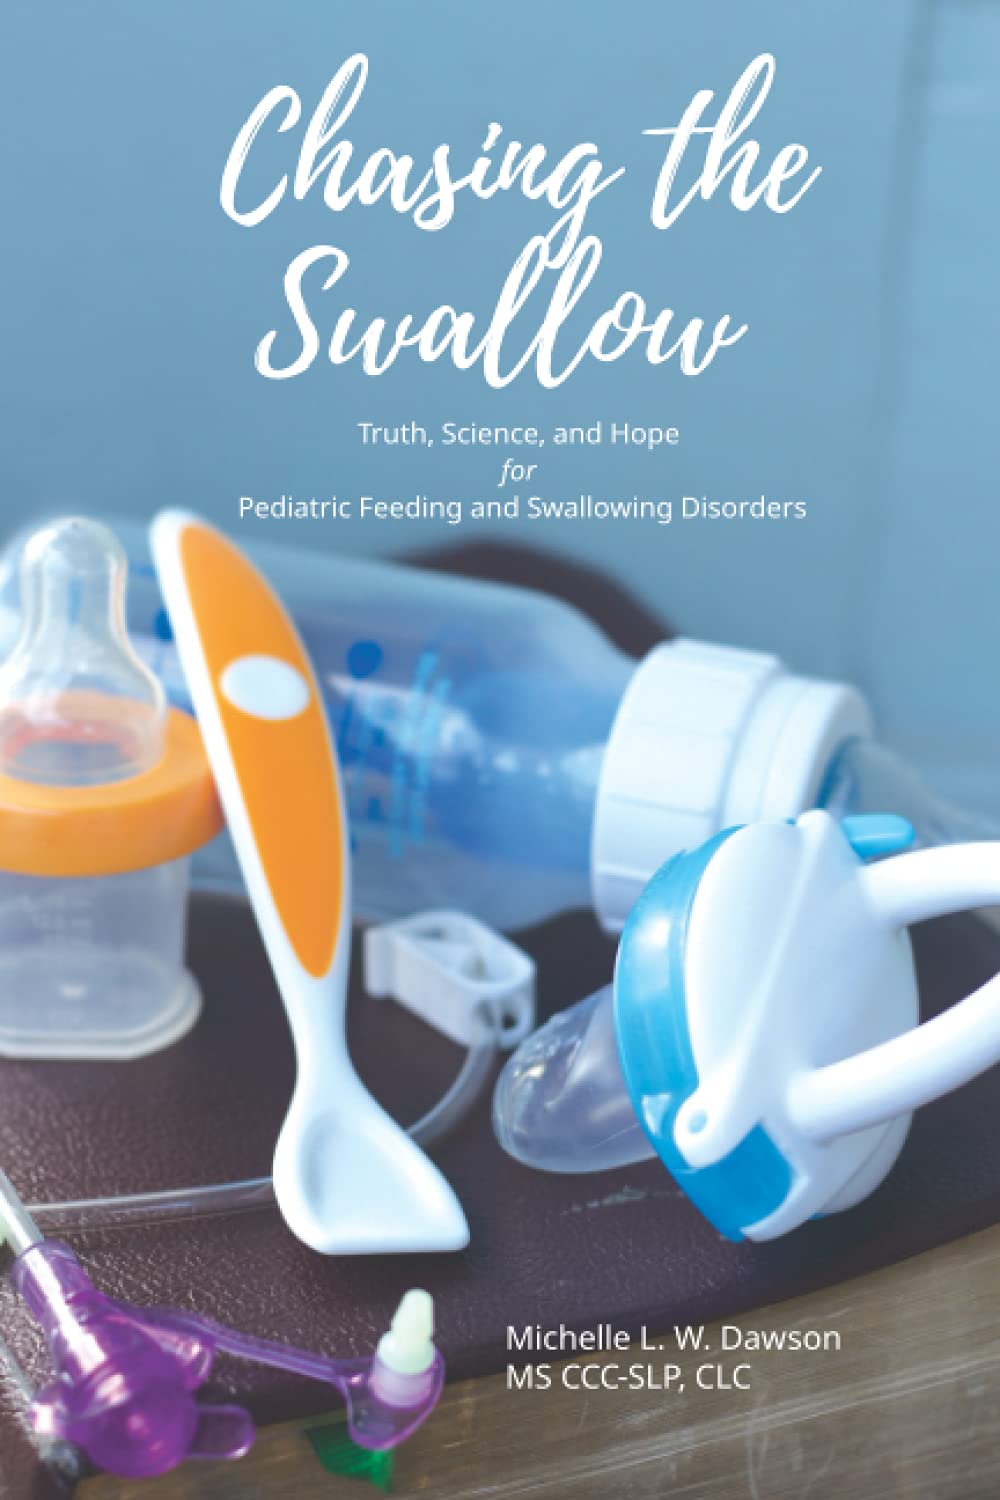 Chasing the Swallow: Truth, Science, and Hope For Pediatric Feeding and Swallowing Disorders